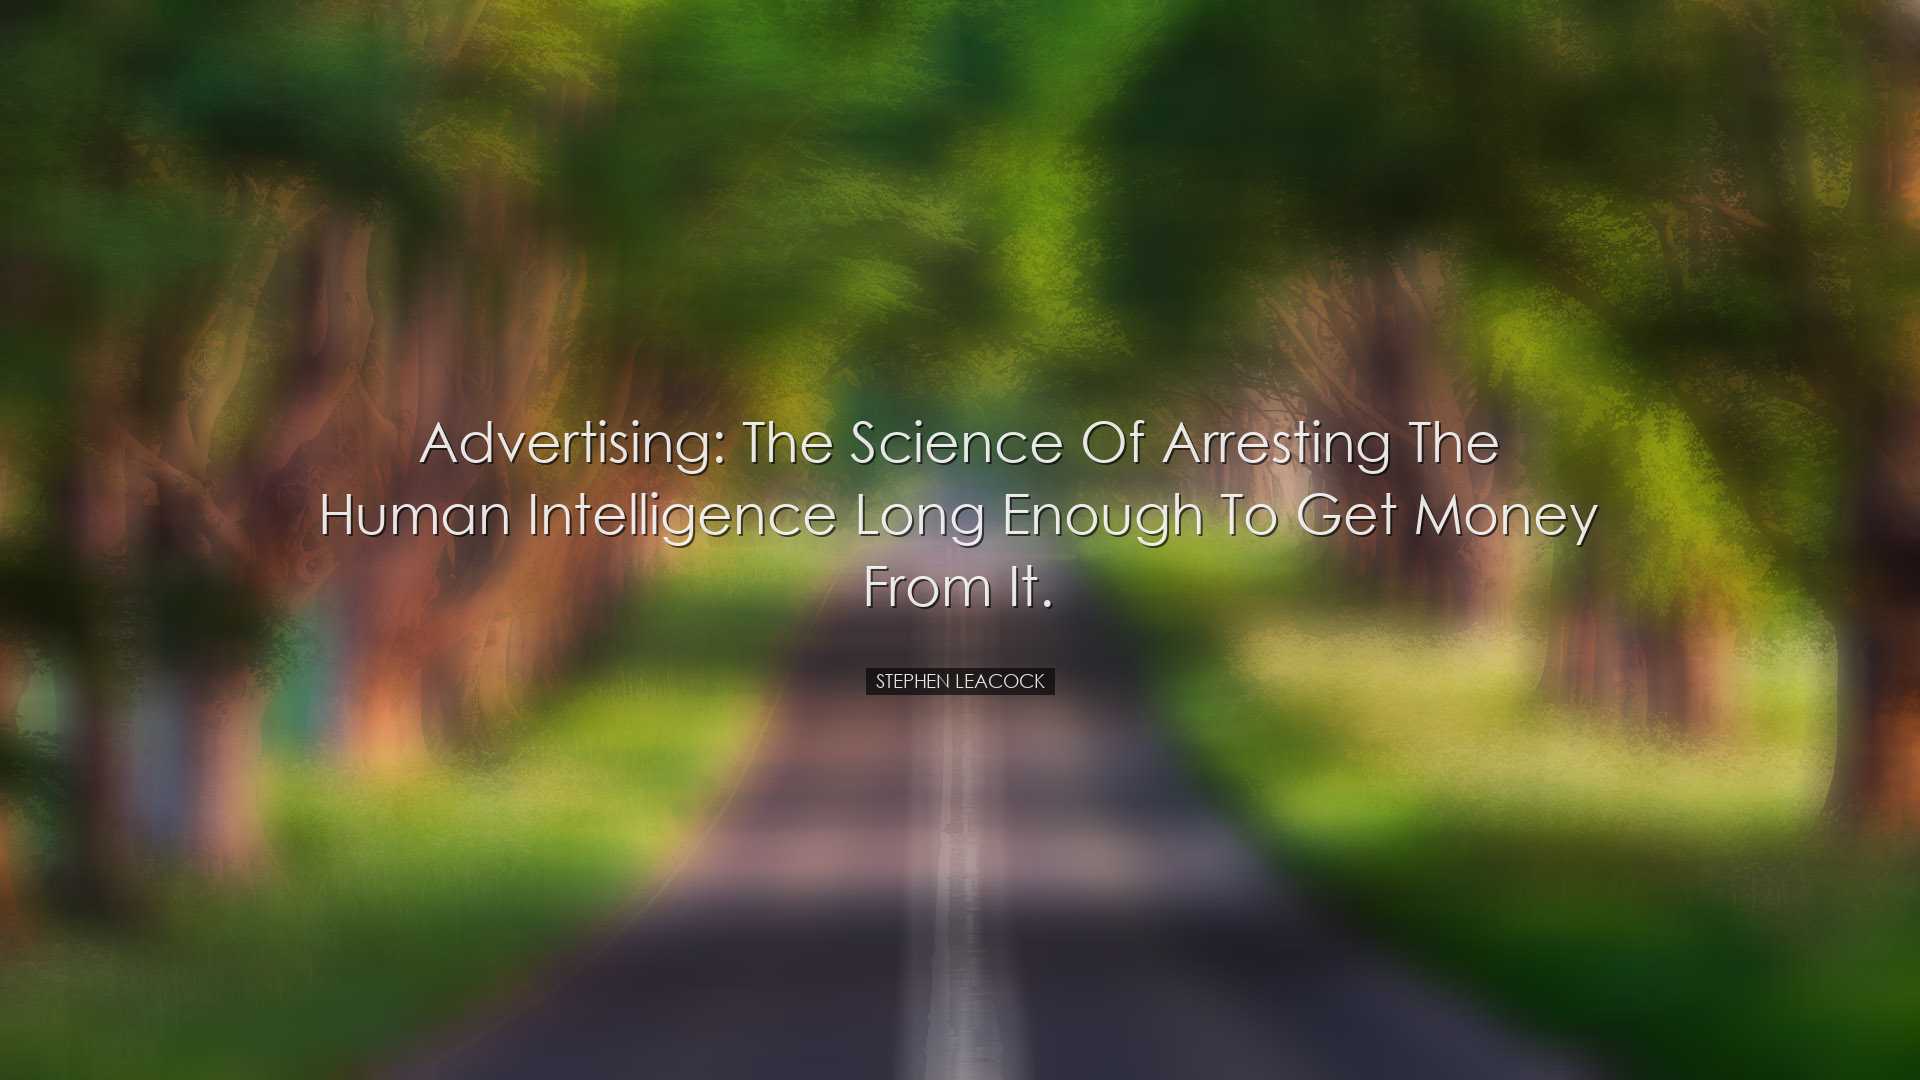 Advertising: the science of arresting the human intelligence long